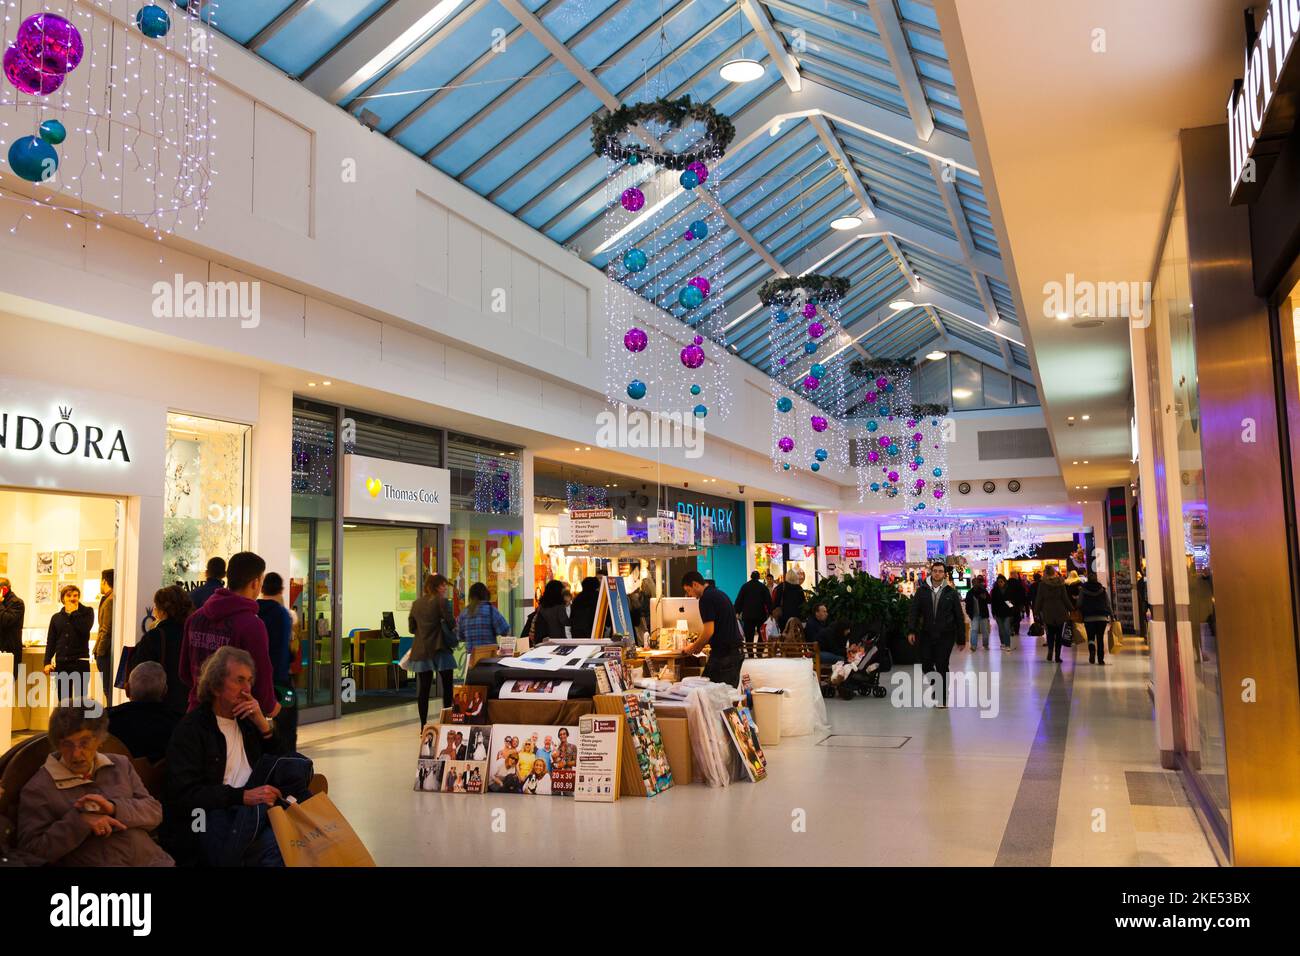 Cascades Shopping Portsmouth a Natale Foto Stock